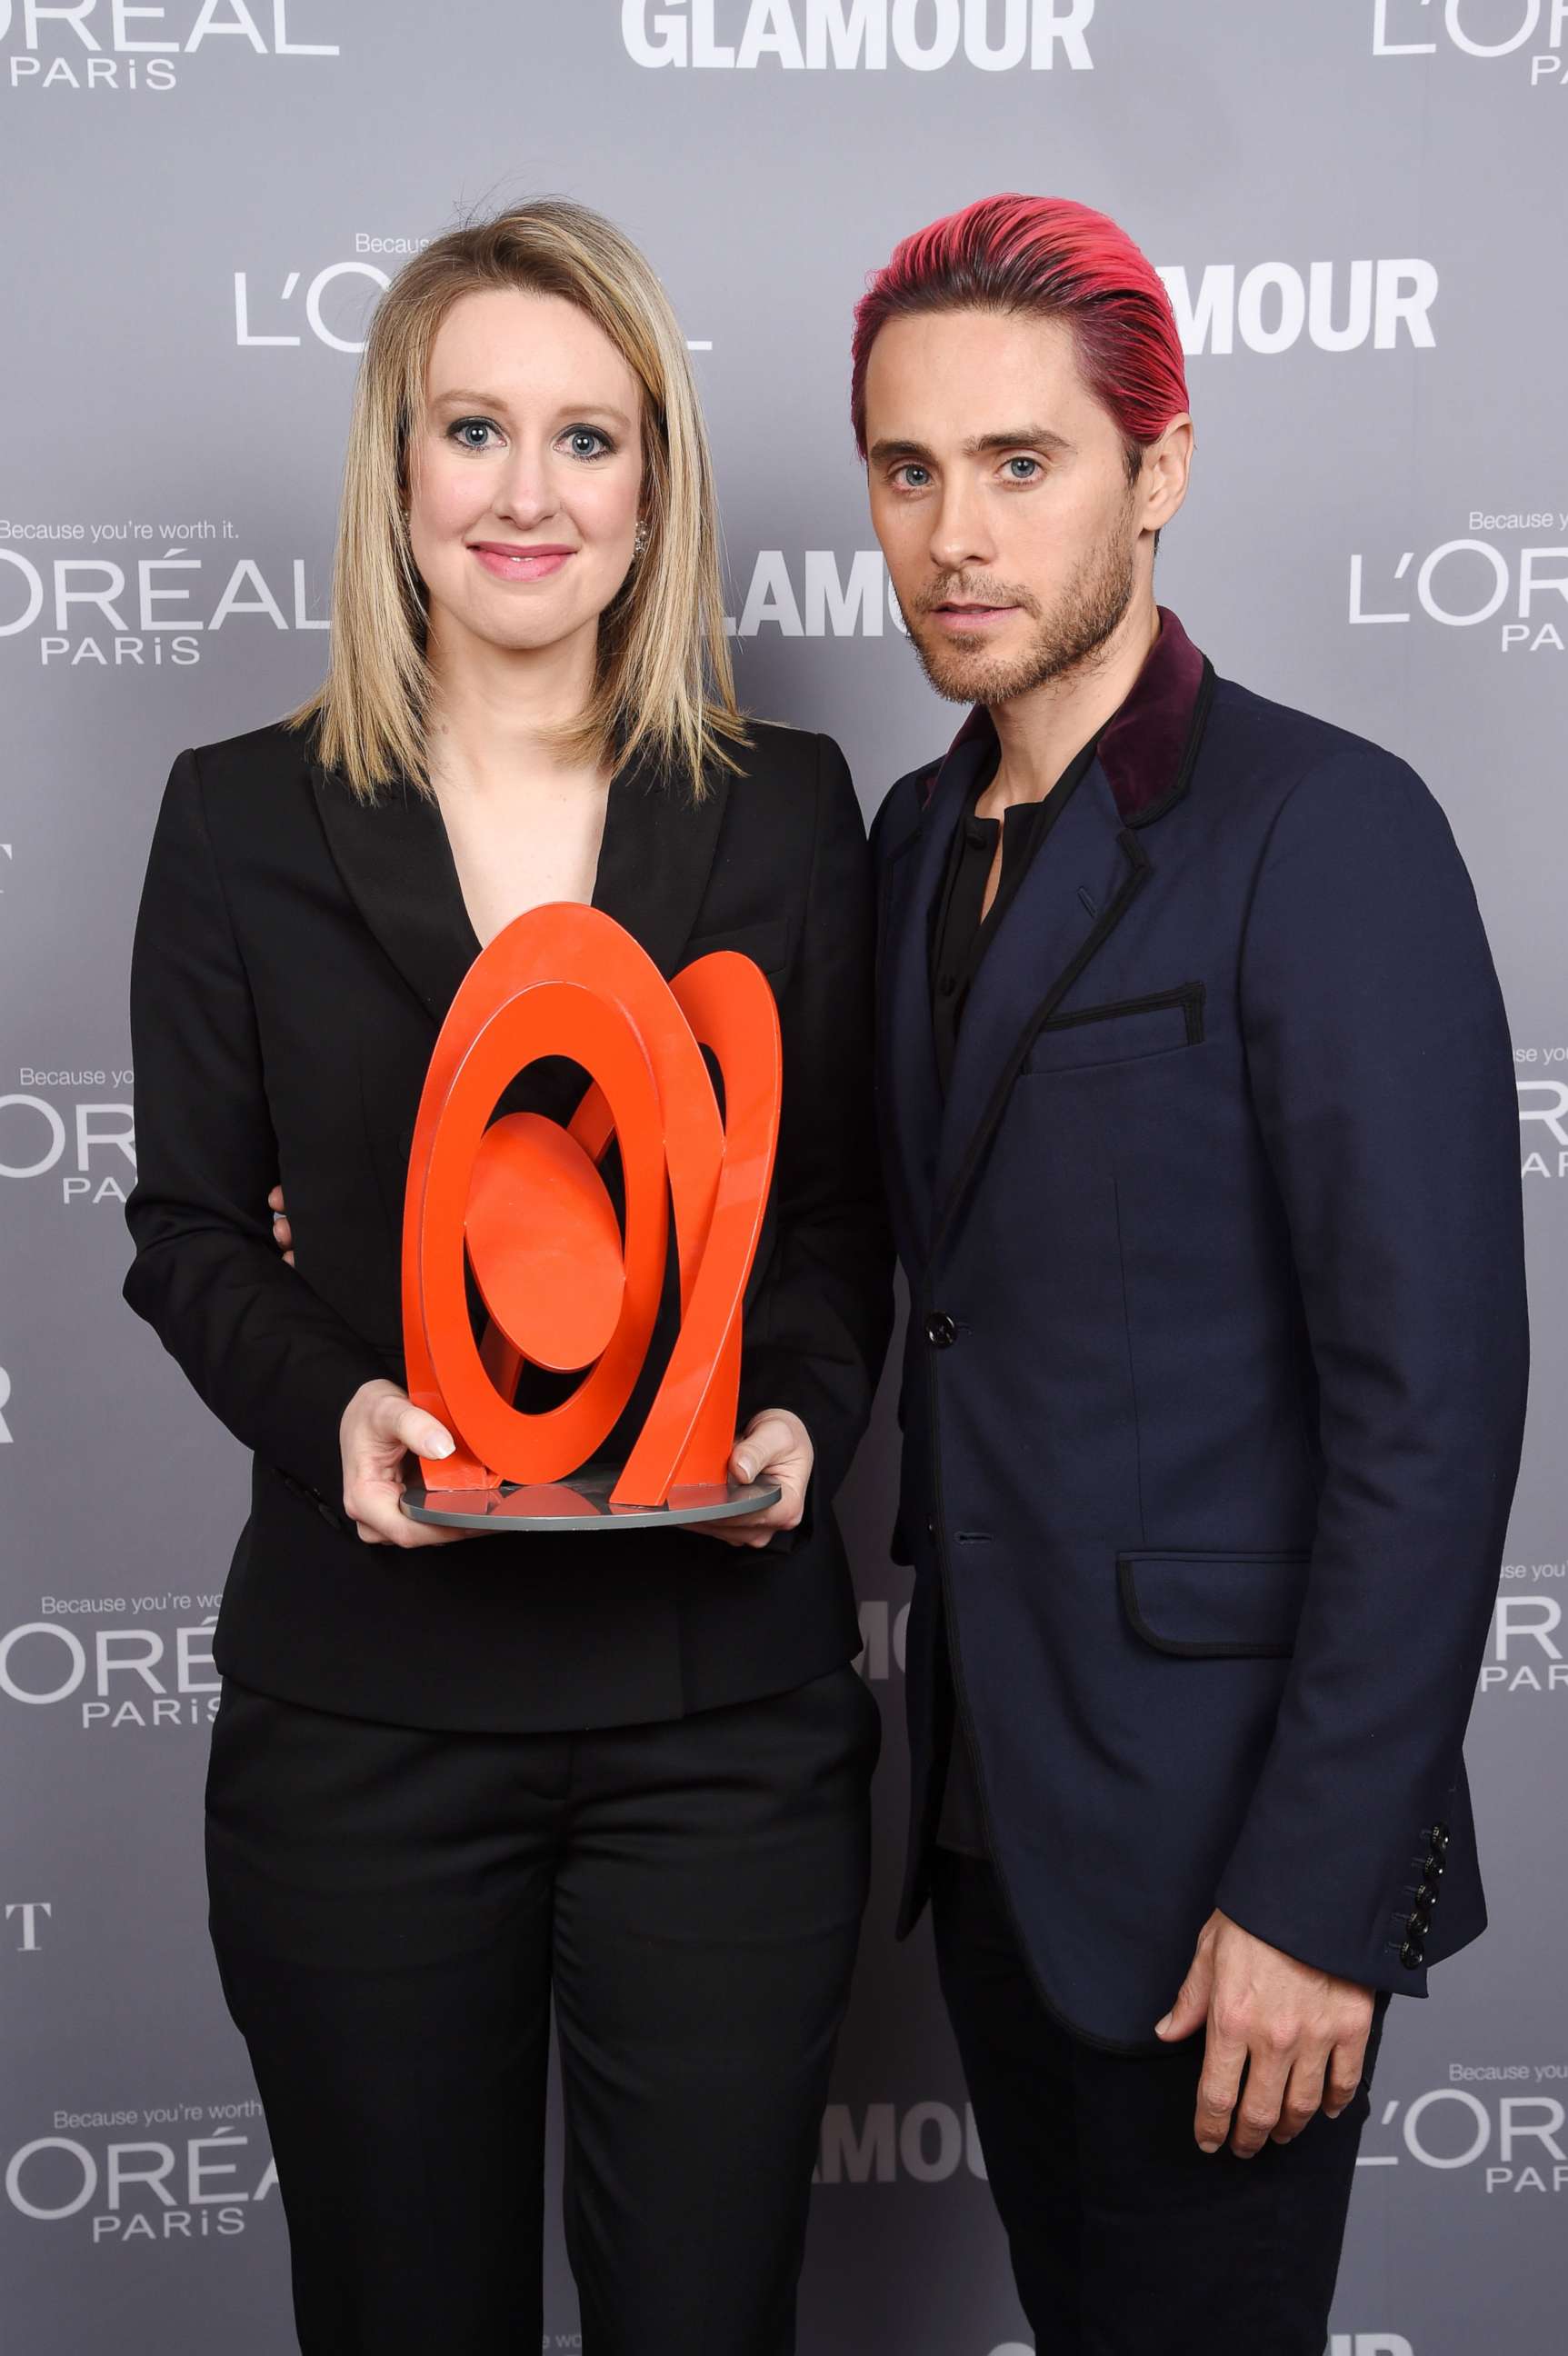 PHOTO: Honoree Elizabeth Holmes poses backstage with her award and actor Jared Leto at the 2015 Glamour Women Of The Year Awards at Carnegie Hall, Nov. 9, 2015, in New York. 